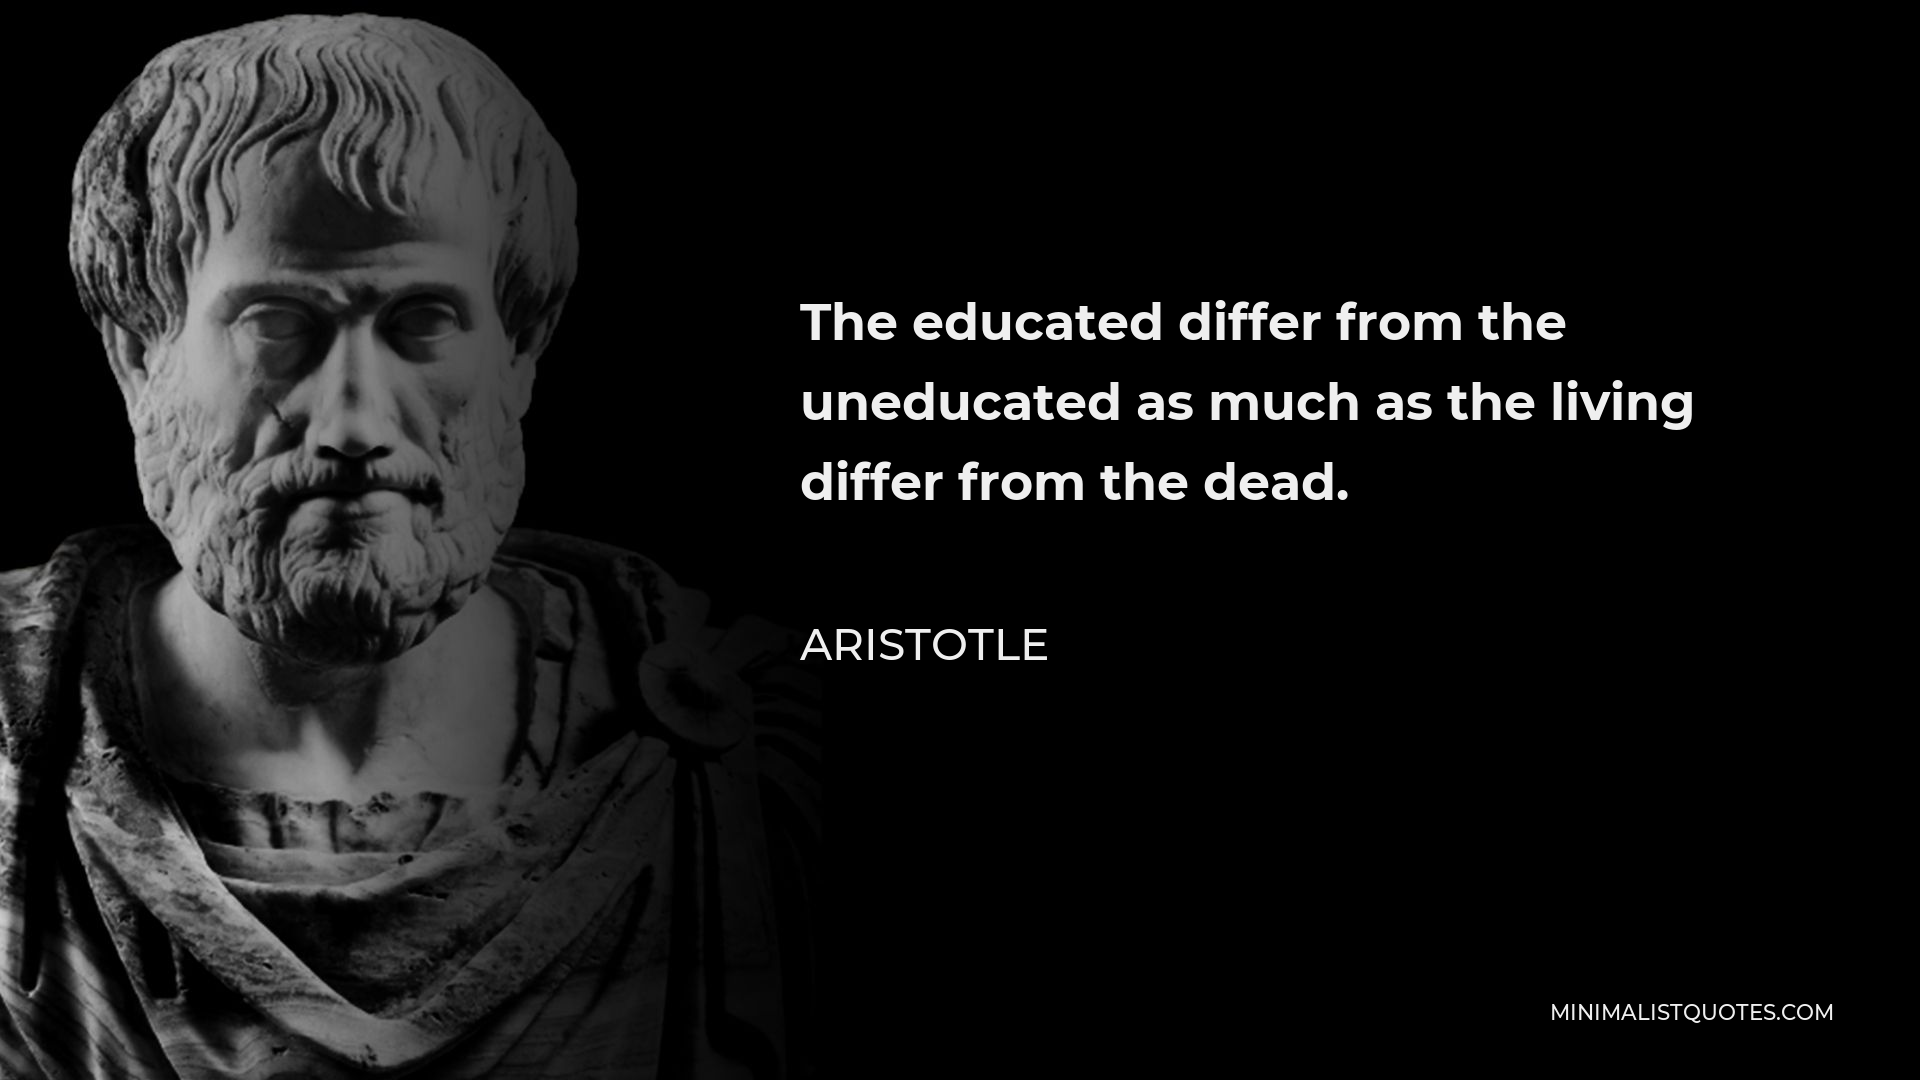 Aristotle Quote - The educated differ from the uneducated as much as the living differ from the dead.